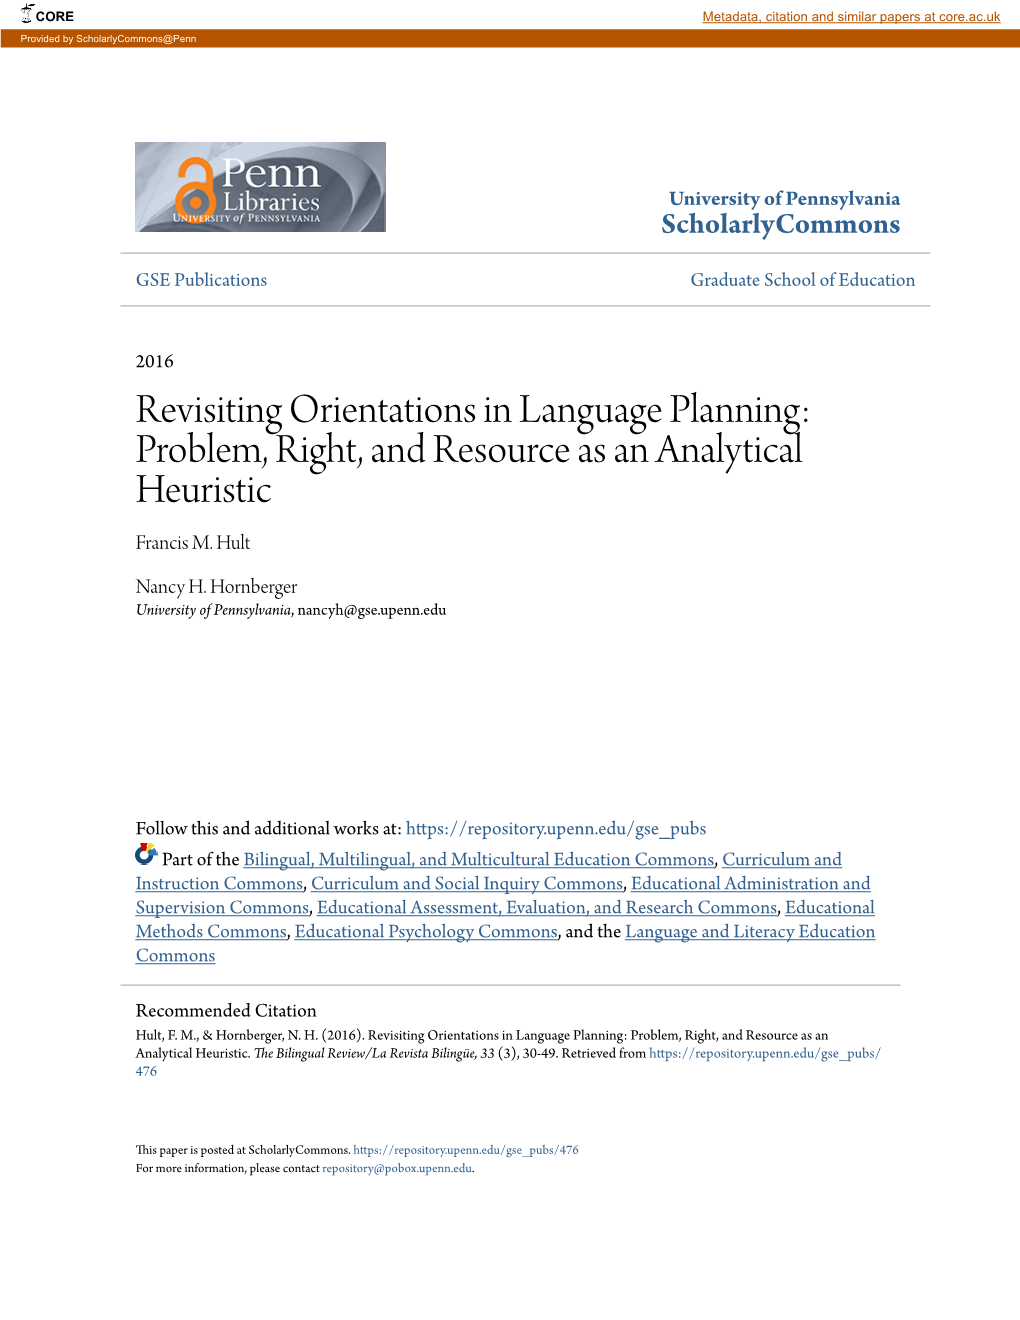 Revisiting Orientations in Language Planning: Problem, Right, and Resource As an Analytical Heuristic Francis M